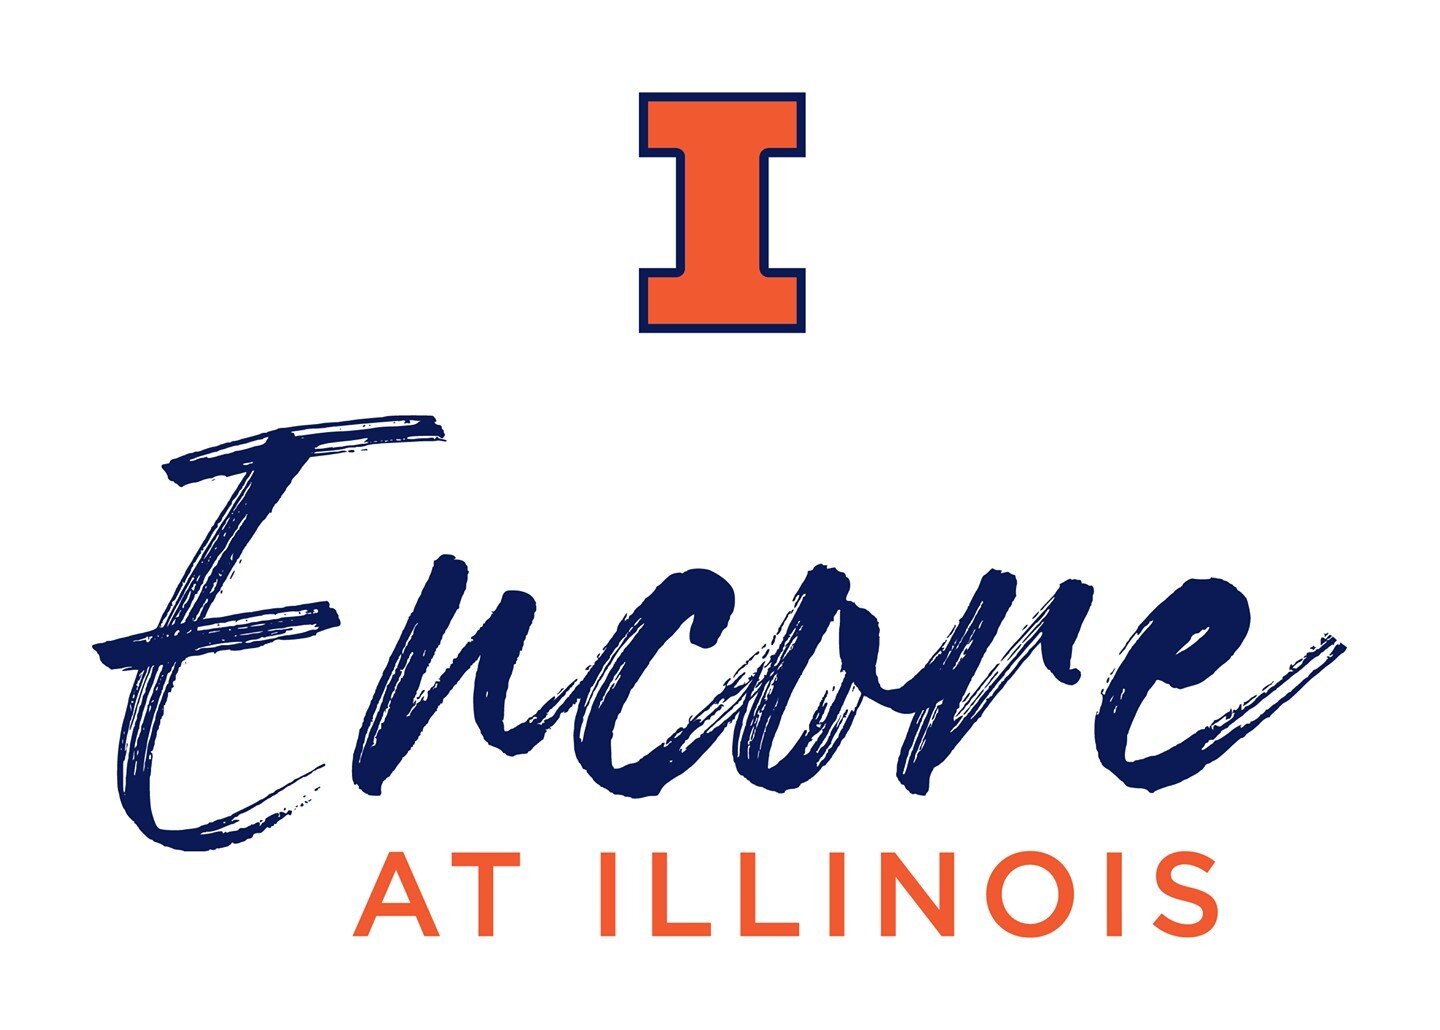 Each Wednesday we will be featuring one of our &quot;Encore at Illinois&quot; panel discussions. 

This week we present a panel led by Dr. Andrew Megill titled &quot;Careers in Ensemble Singing&quot; featuring: 

Andrew Fuchs, tenor Pegasus Early Mus